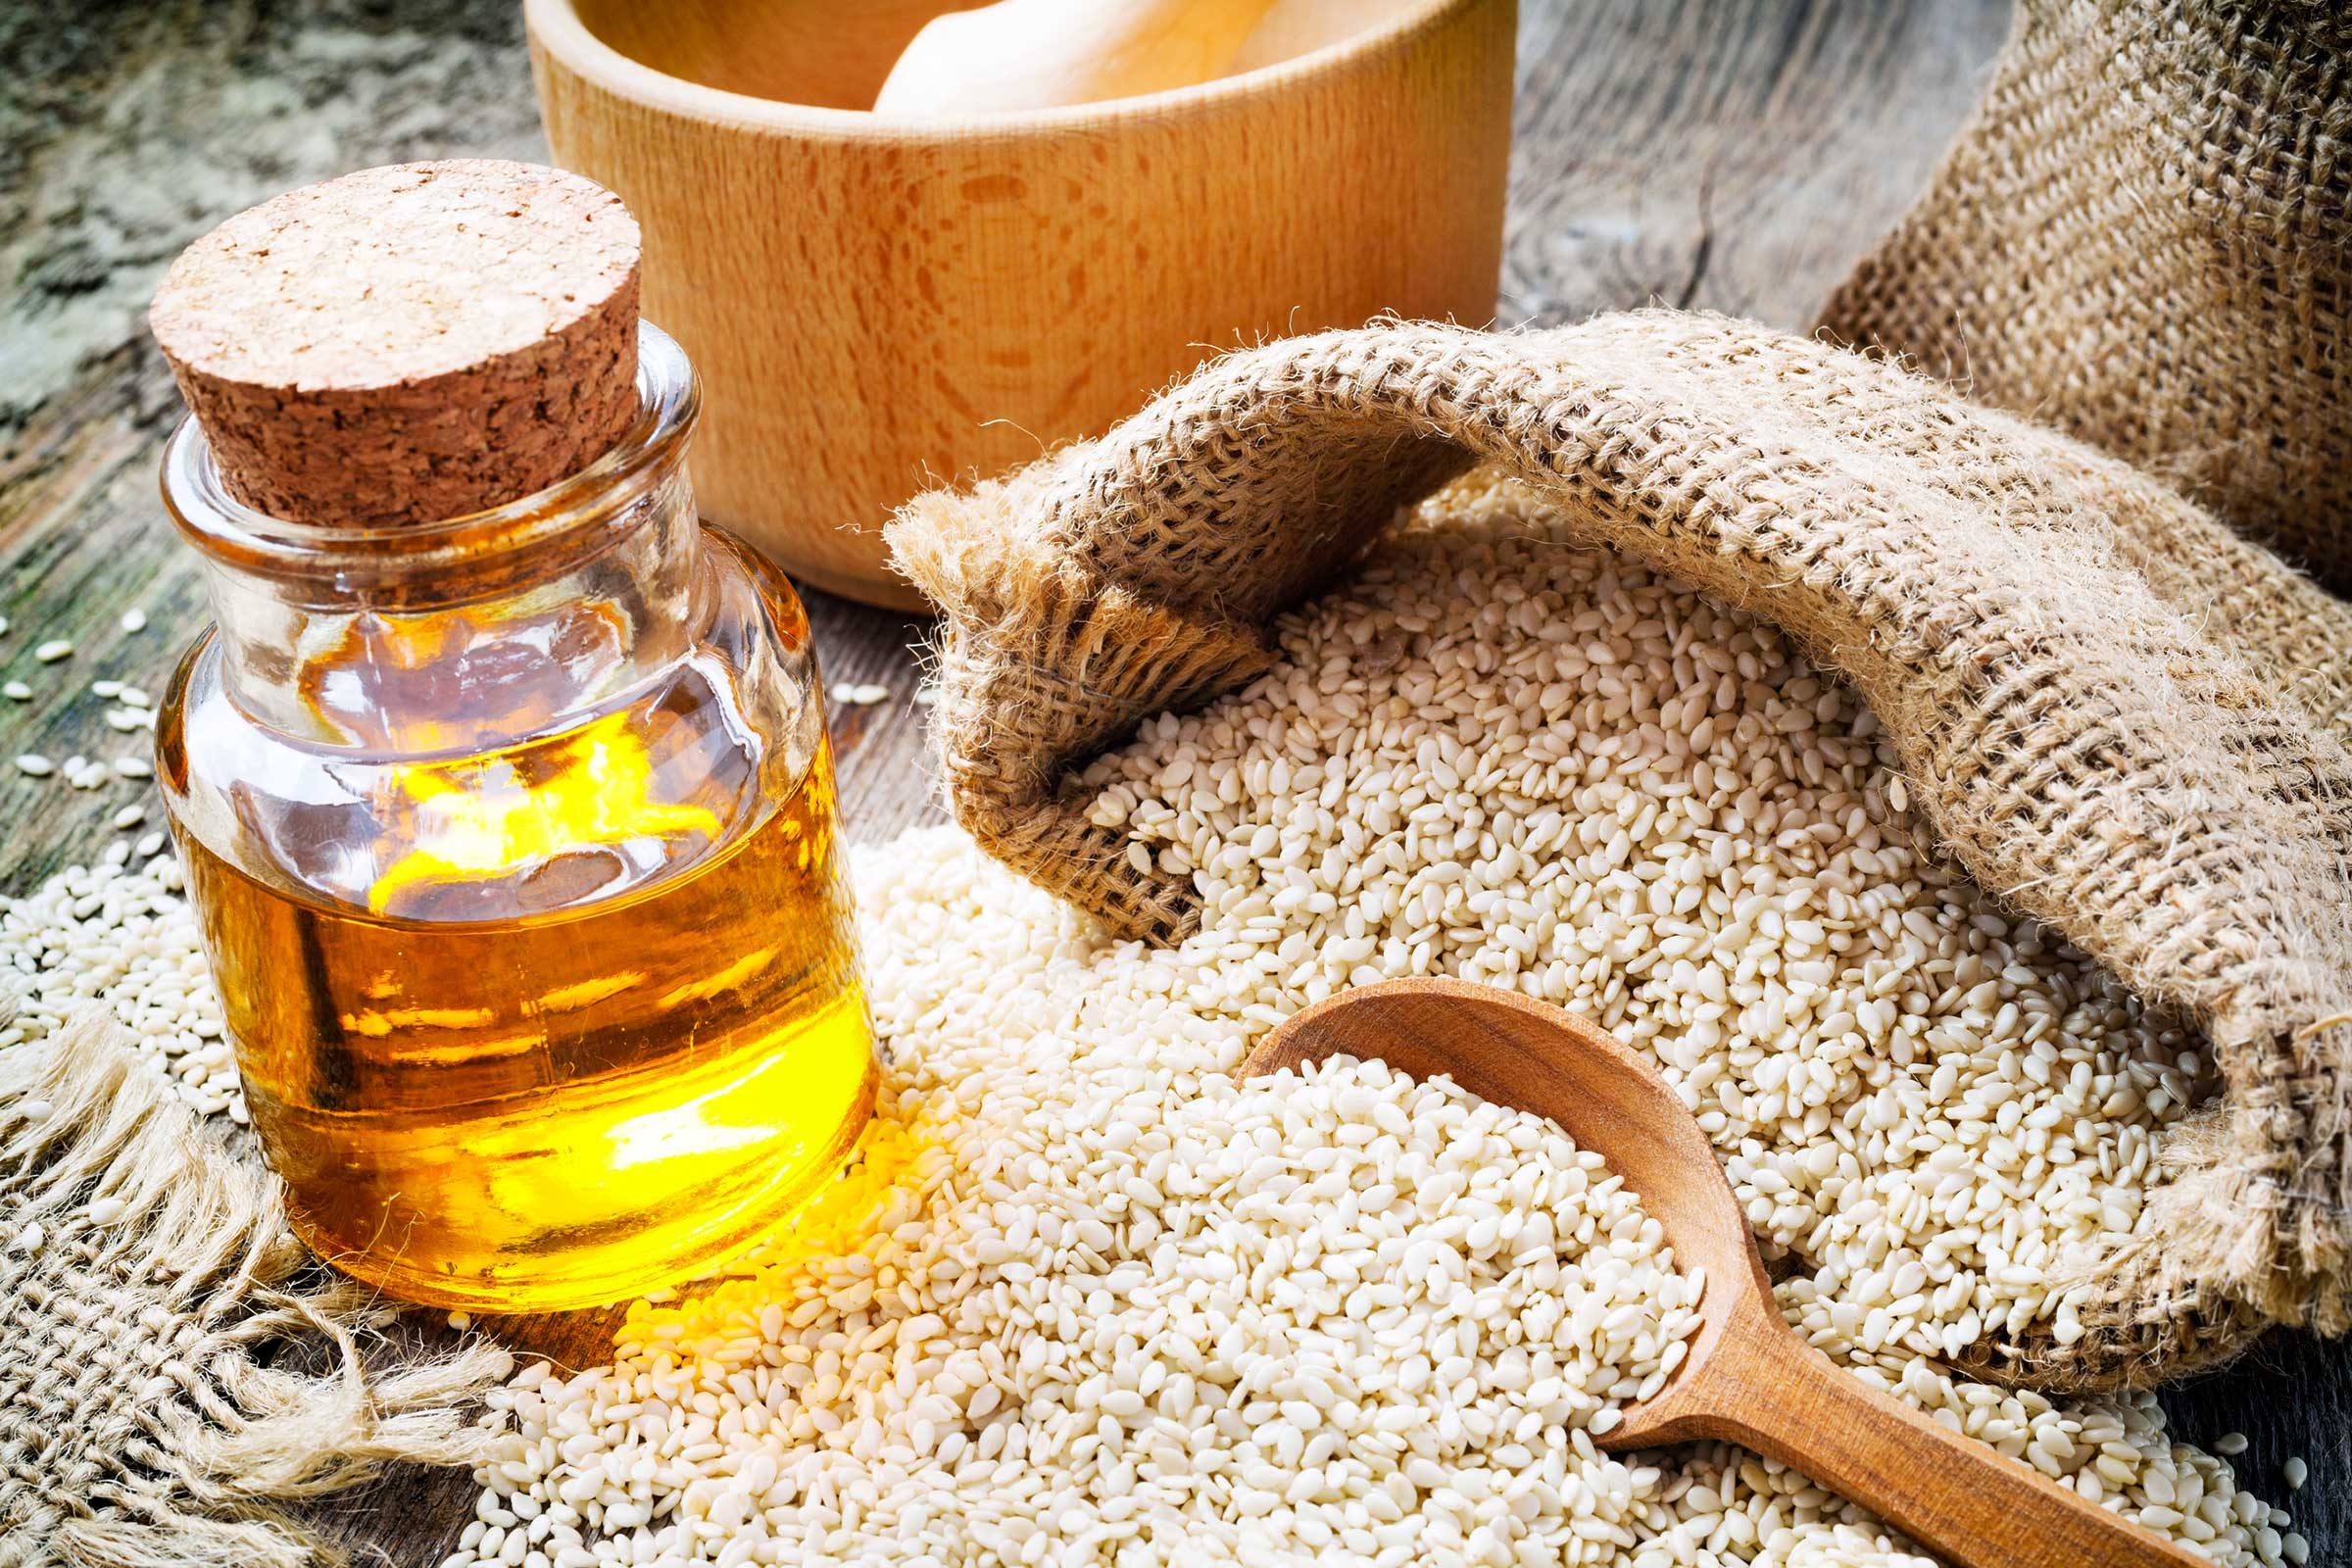 7 Sesame Oil Benefits That Will Make You Want to Try It